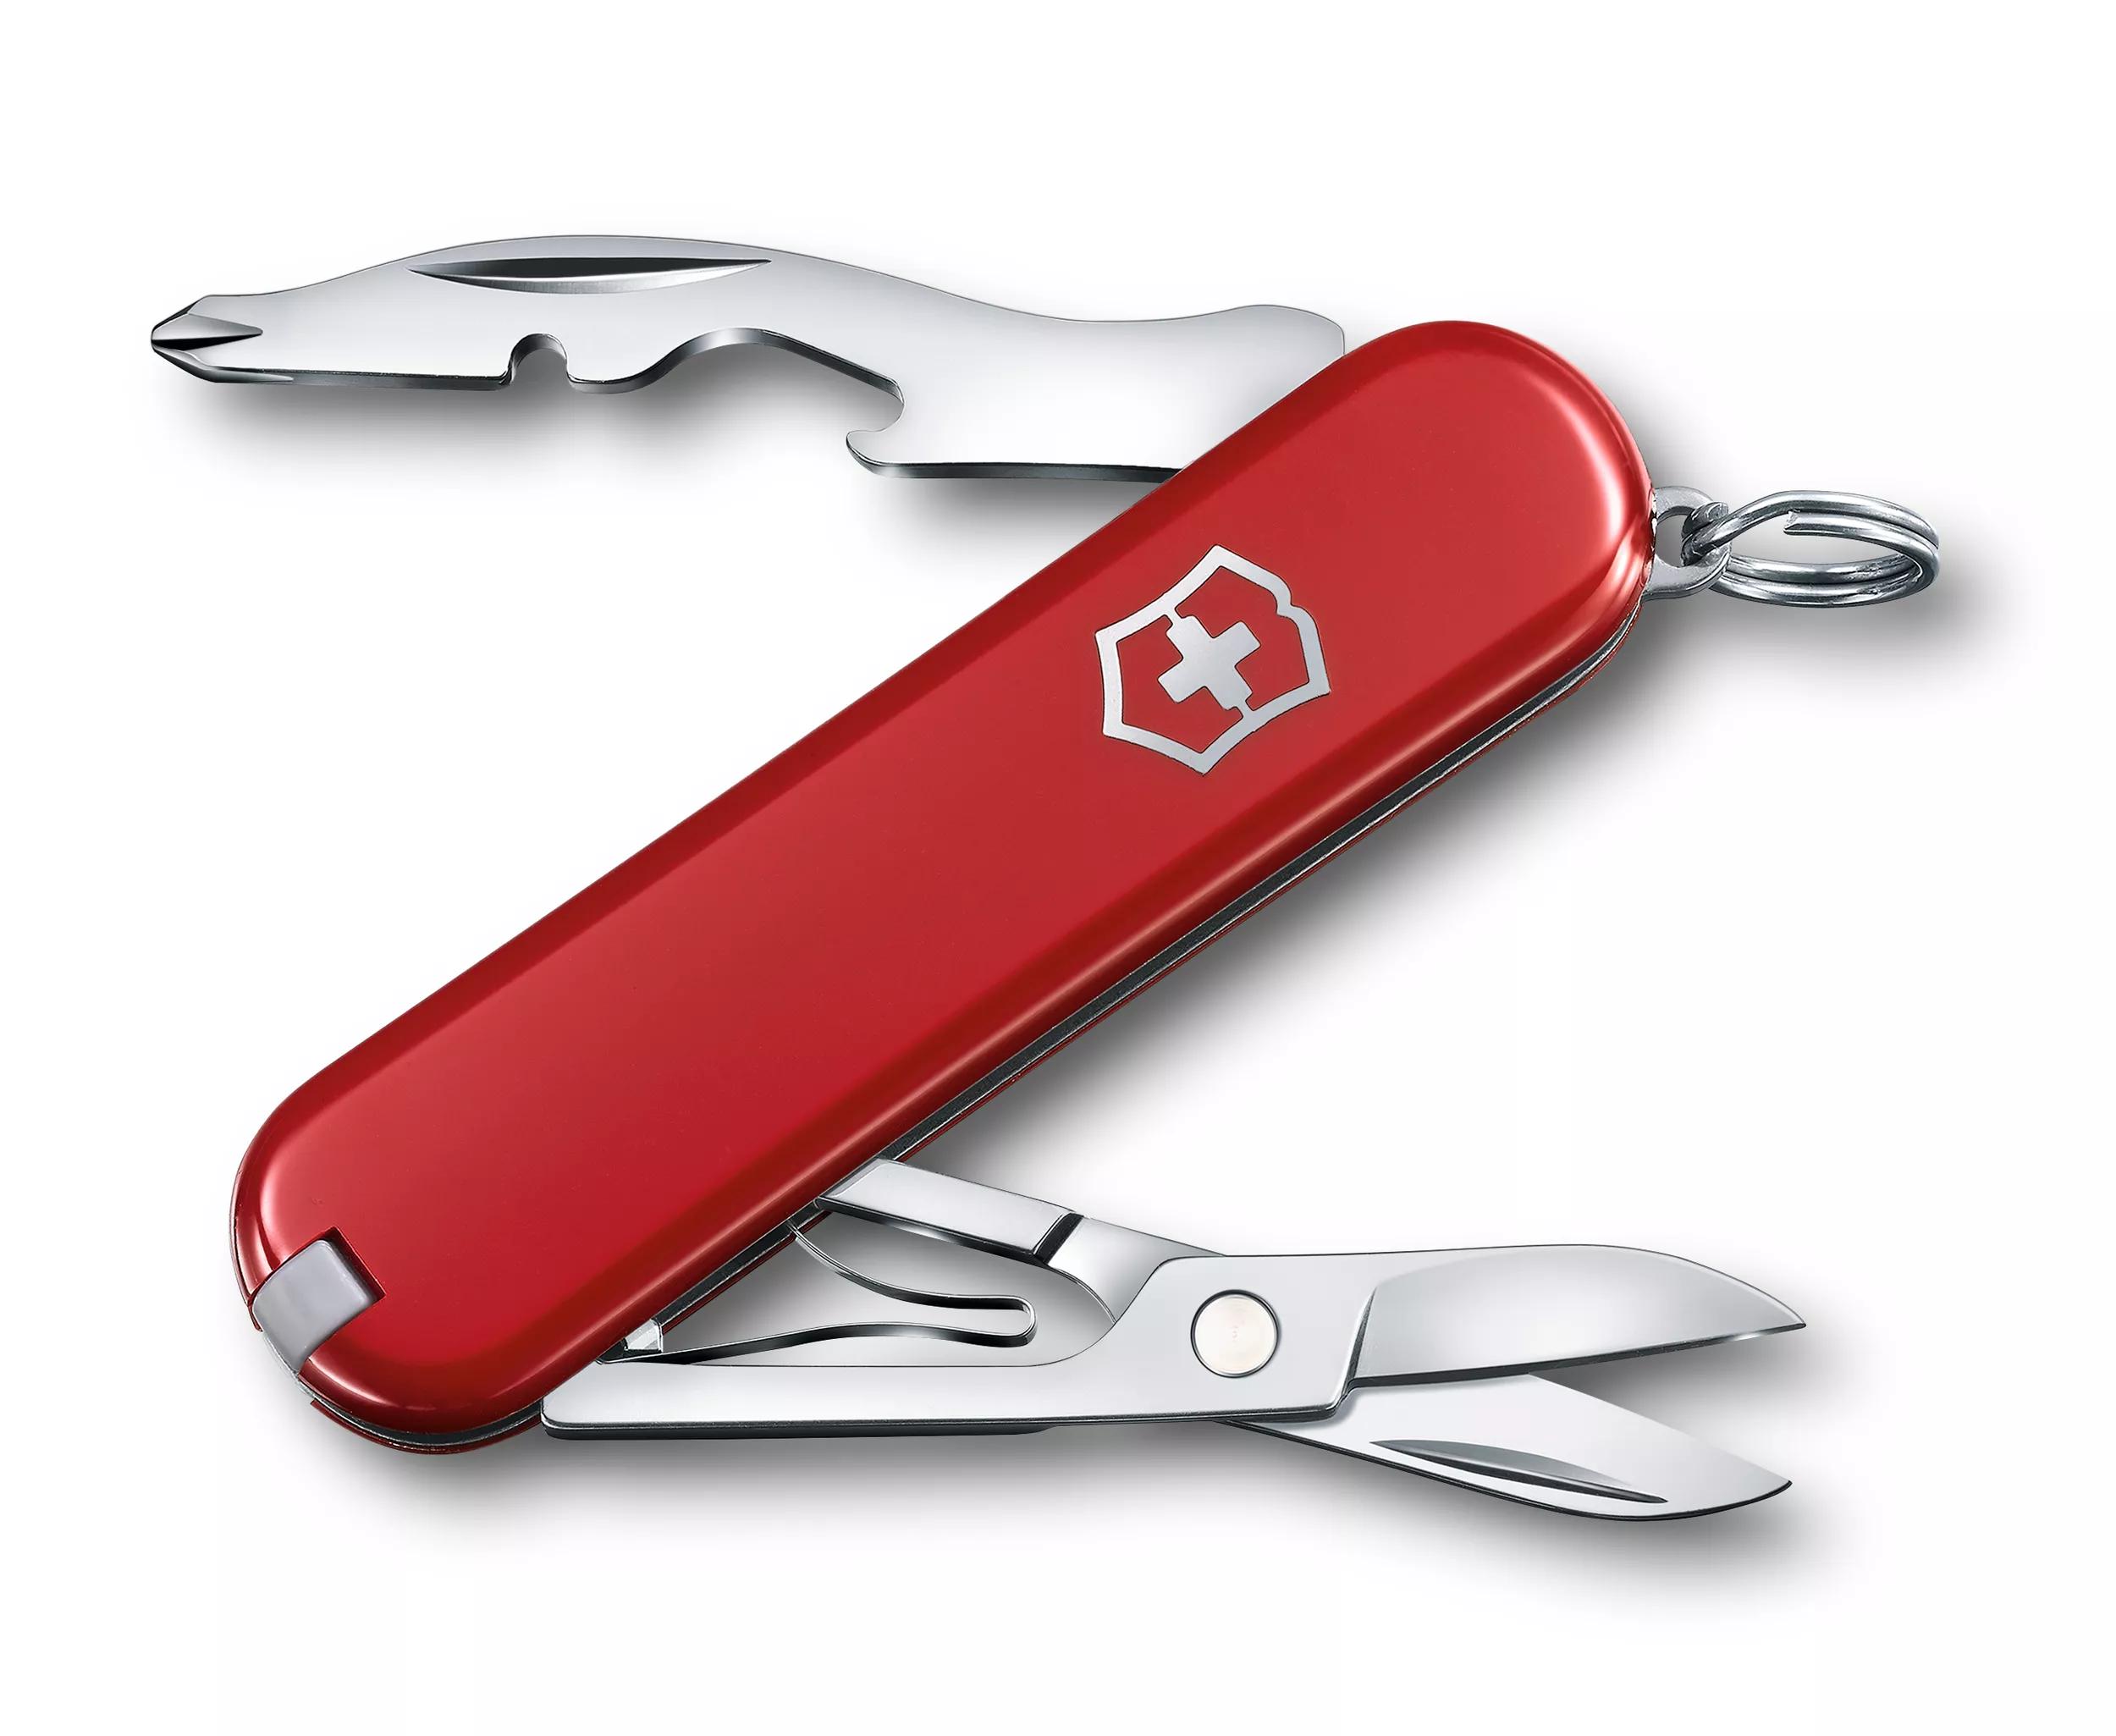 Victorinox Compact - 5 Minute Review 